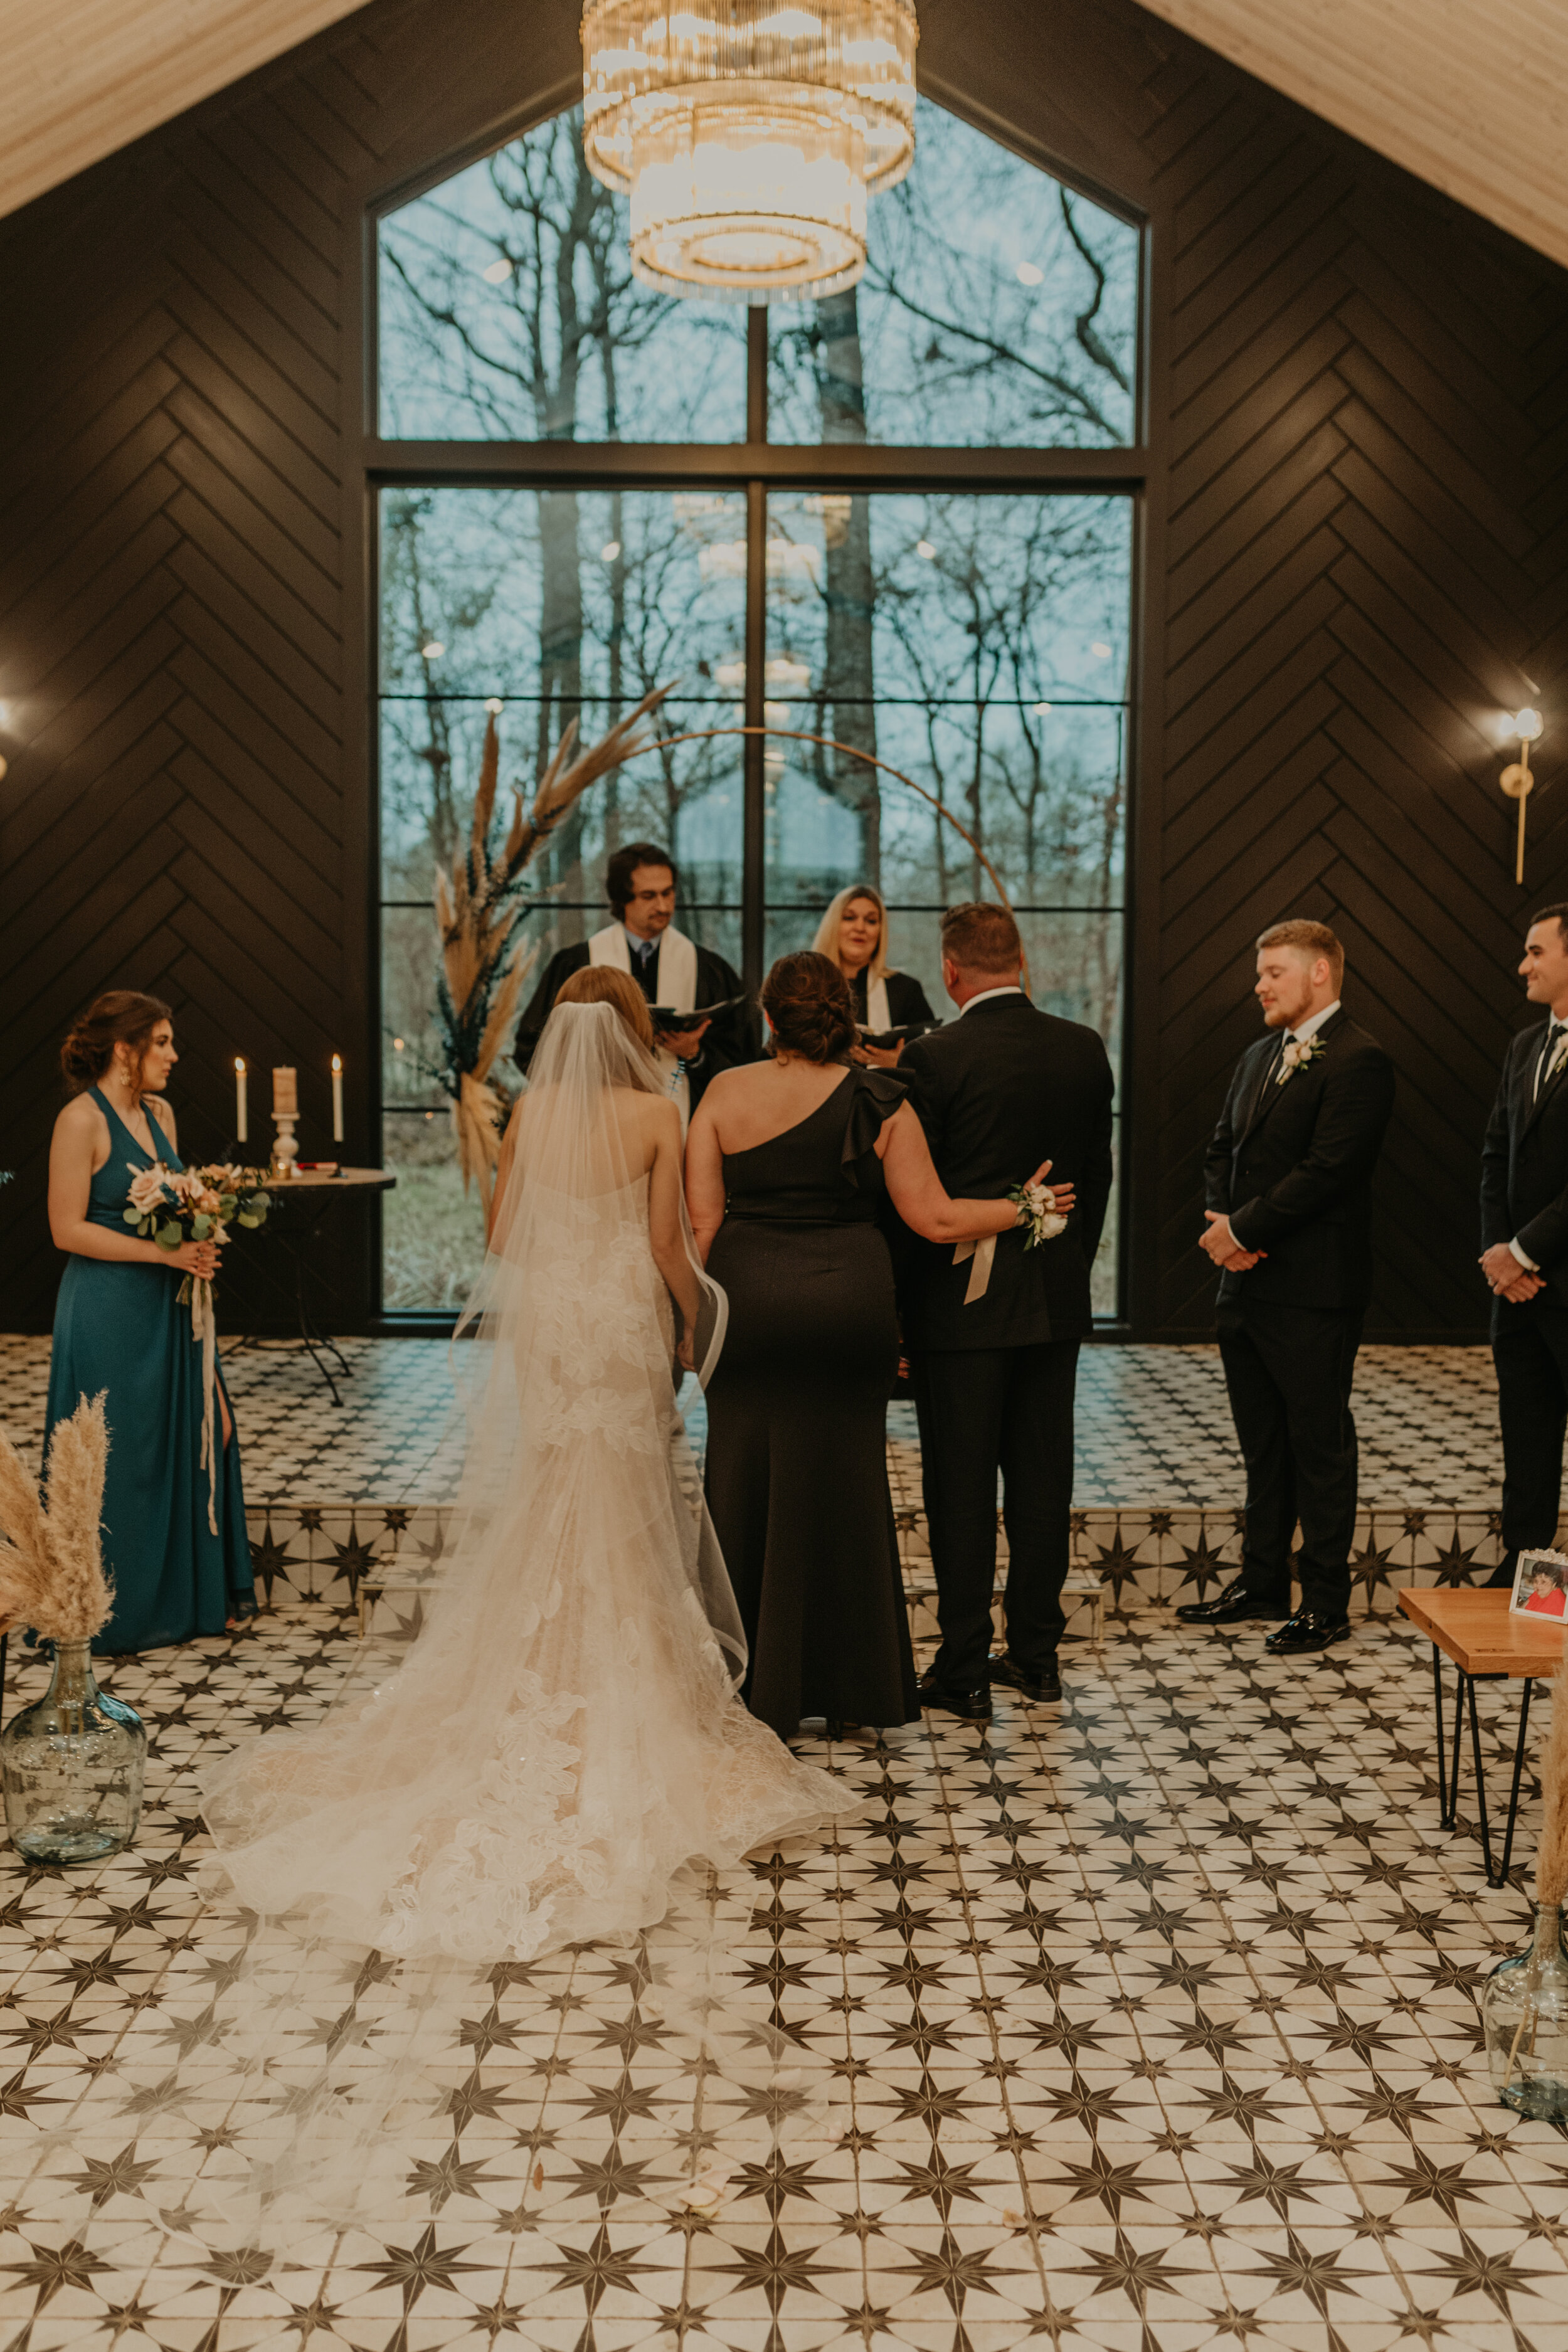  Watters Sirena wedding dress at Dove Hollow Estates in Longview Texas for The Glovers 